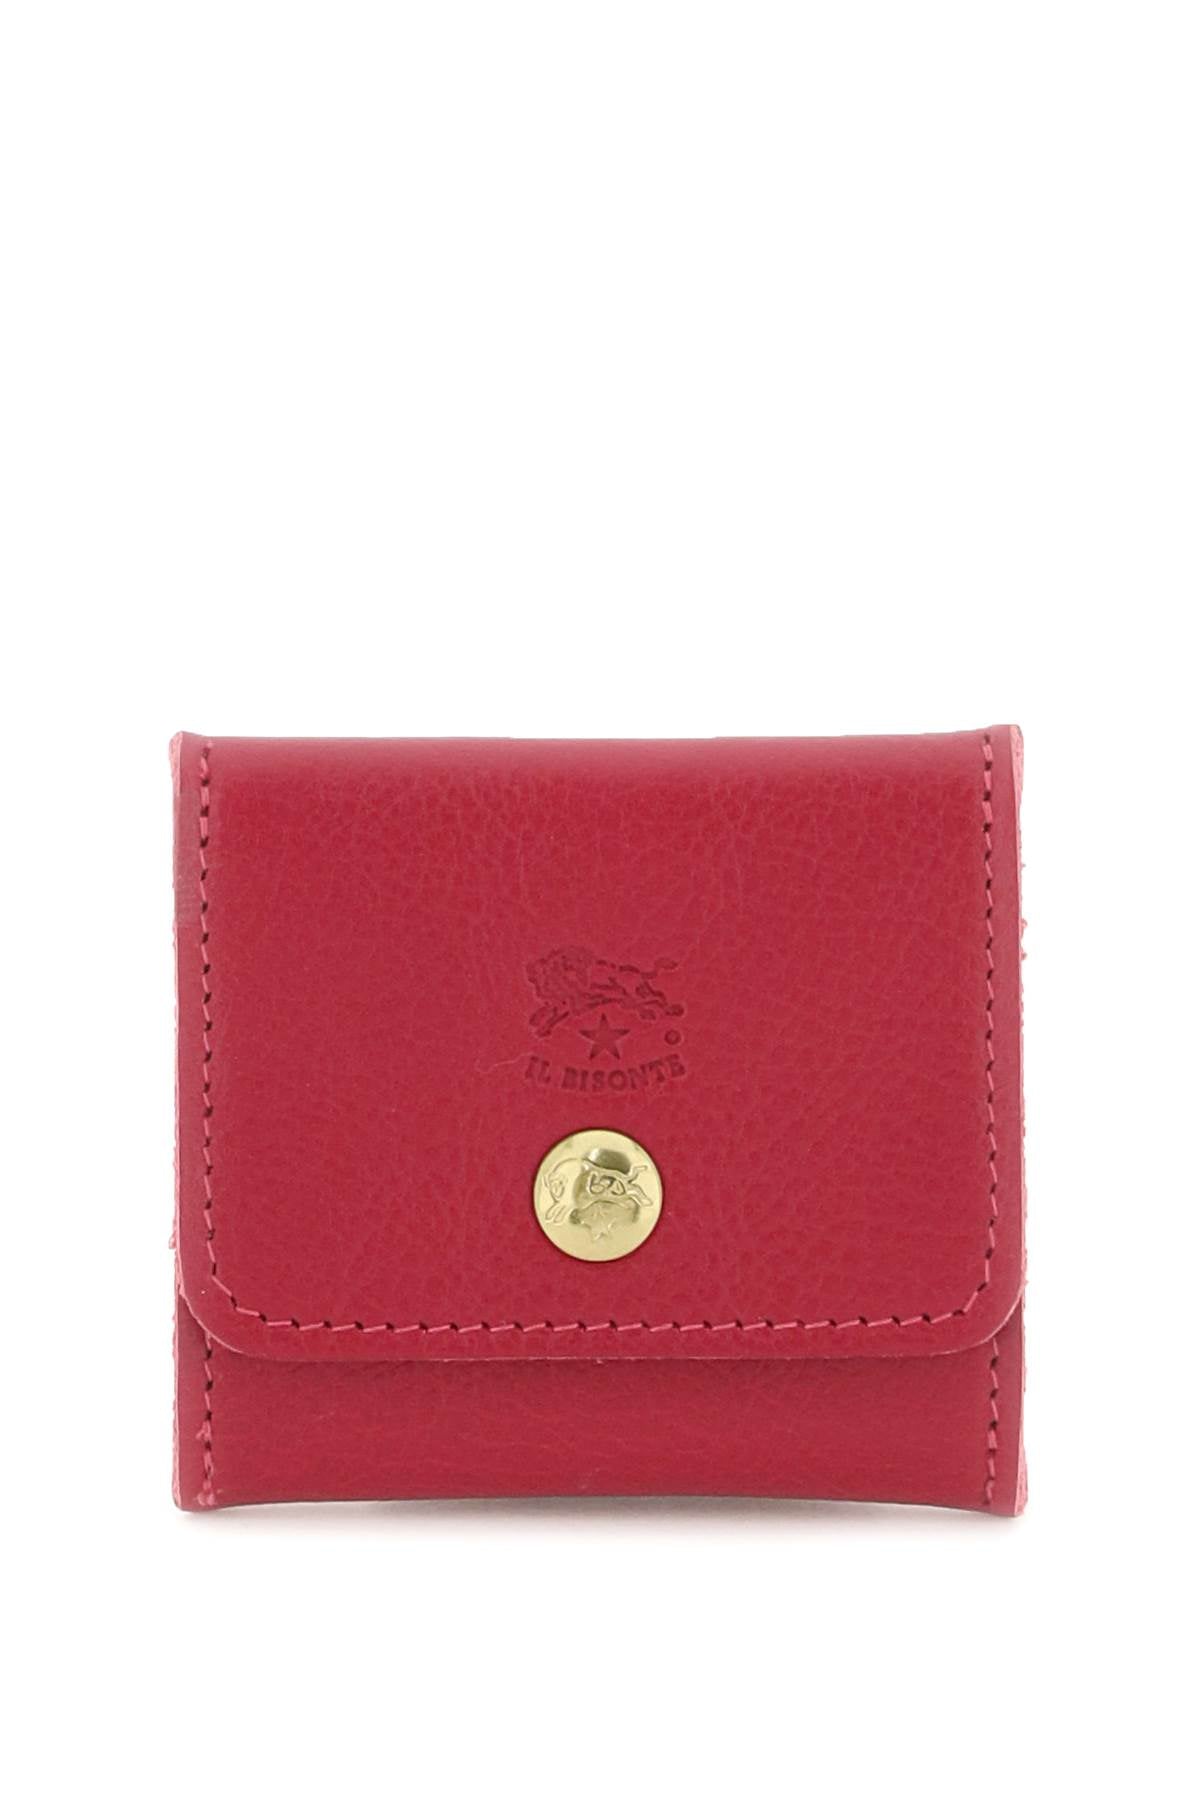 MIXED COLOURS IL BISONTE SOFT CALF LEATHER COIN PURSE